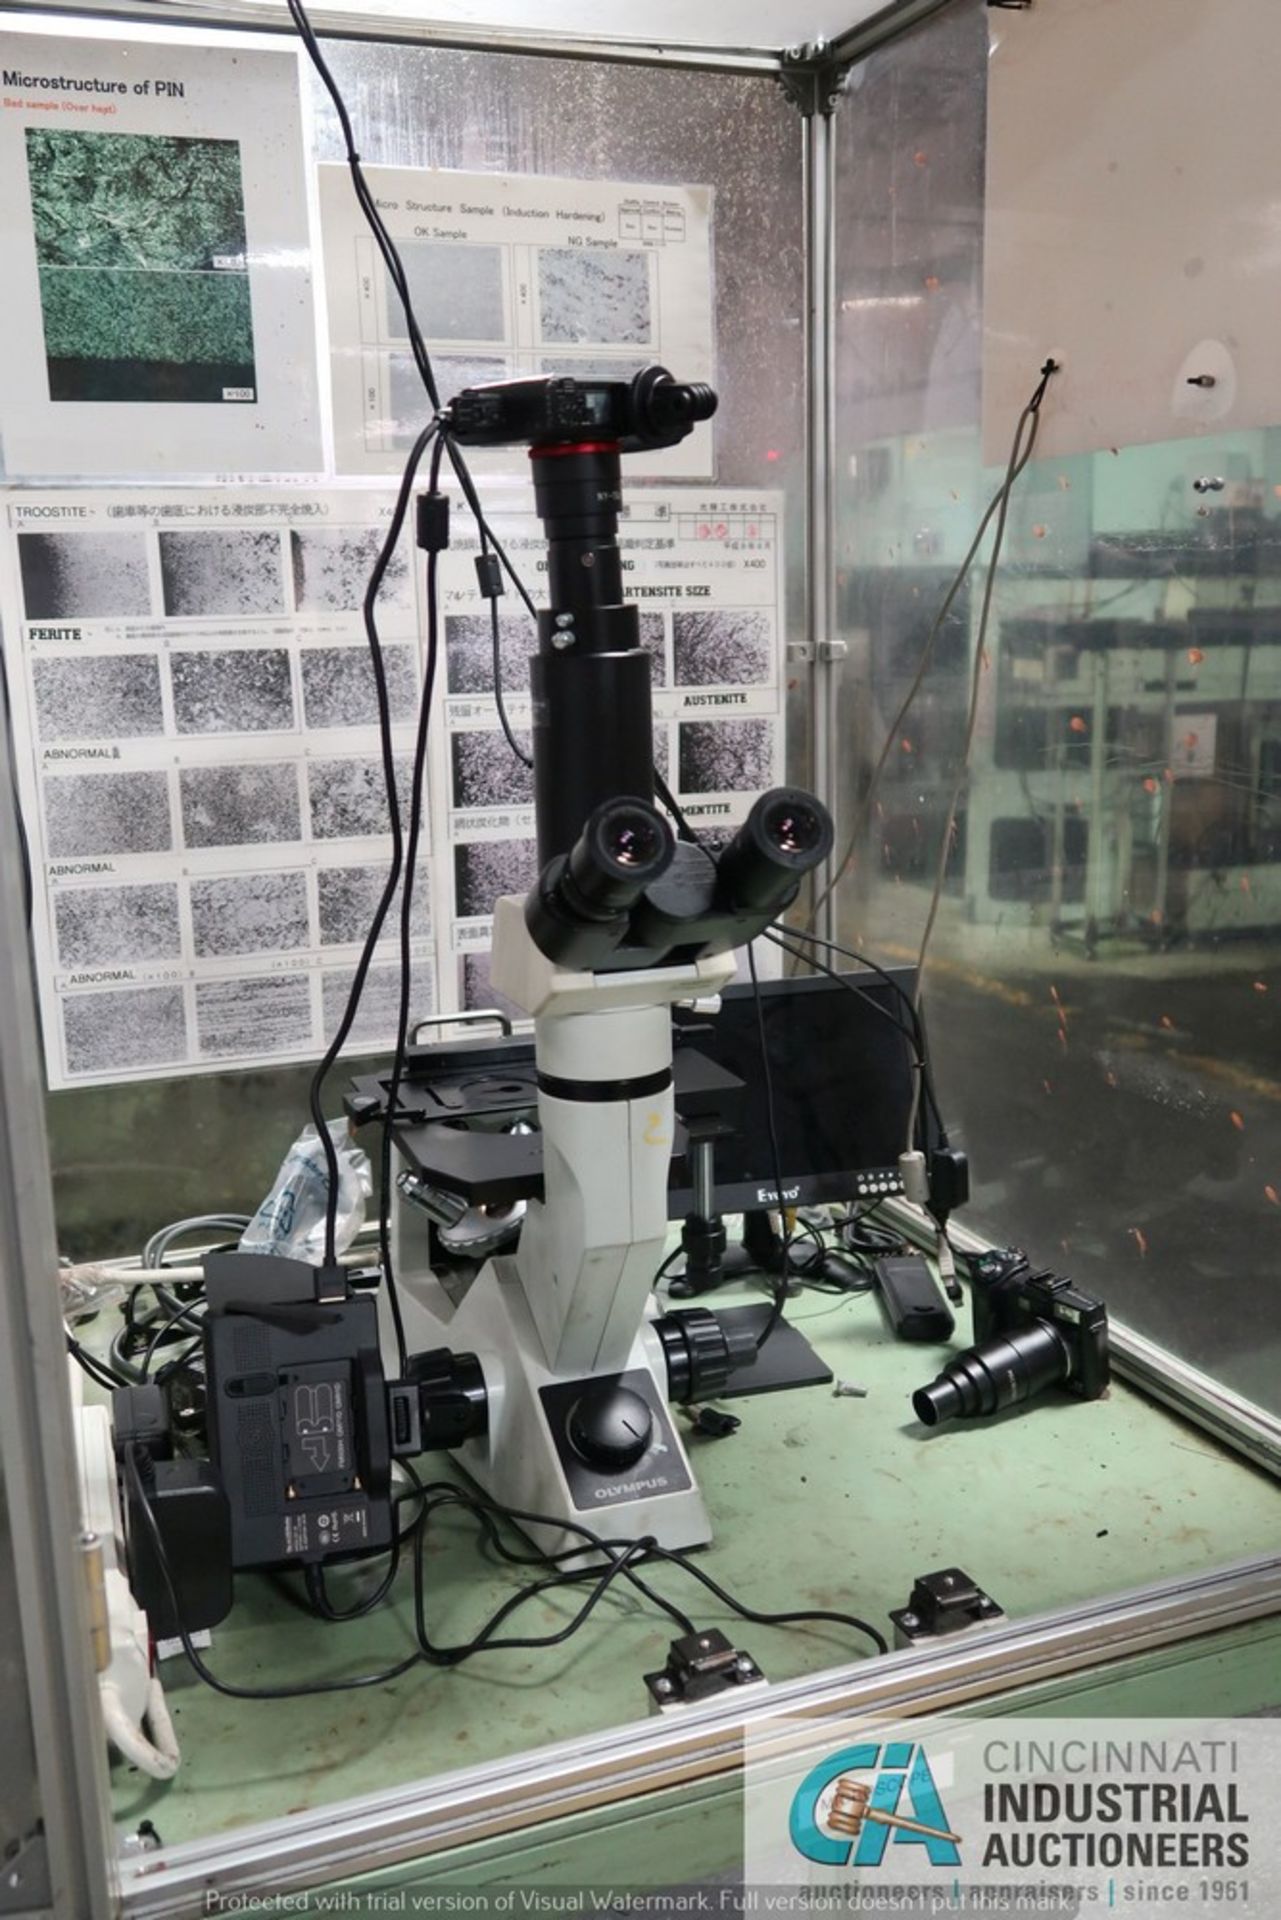 OLYMPUS MODEL GX41 INVERTED METALLURGICAL MICROSCOPE WITH (2) OLYMPUS CAMERAS AND VIEWING MONITOR - Image 2 of 9